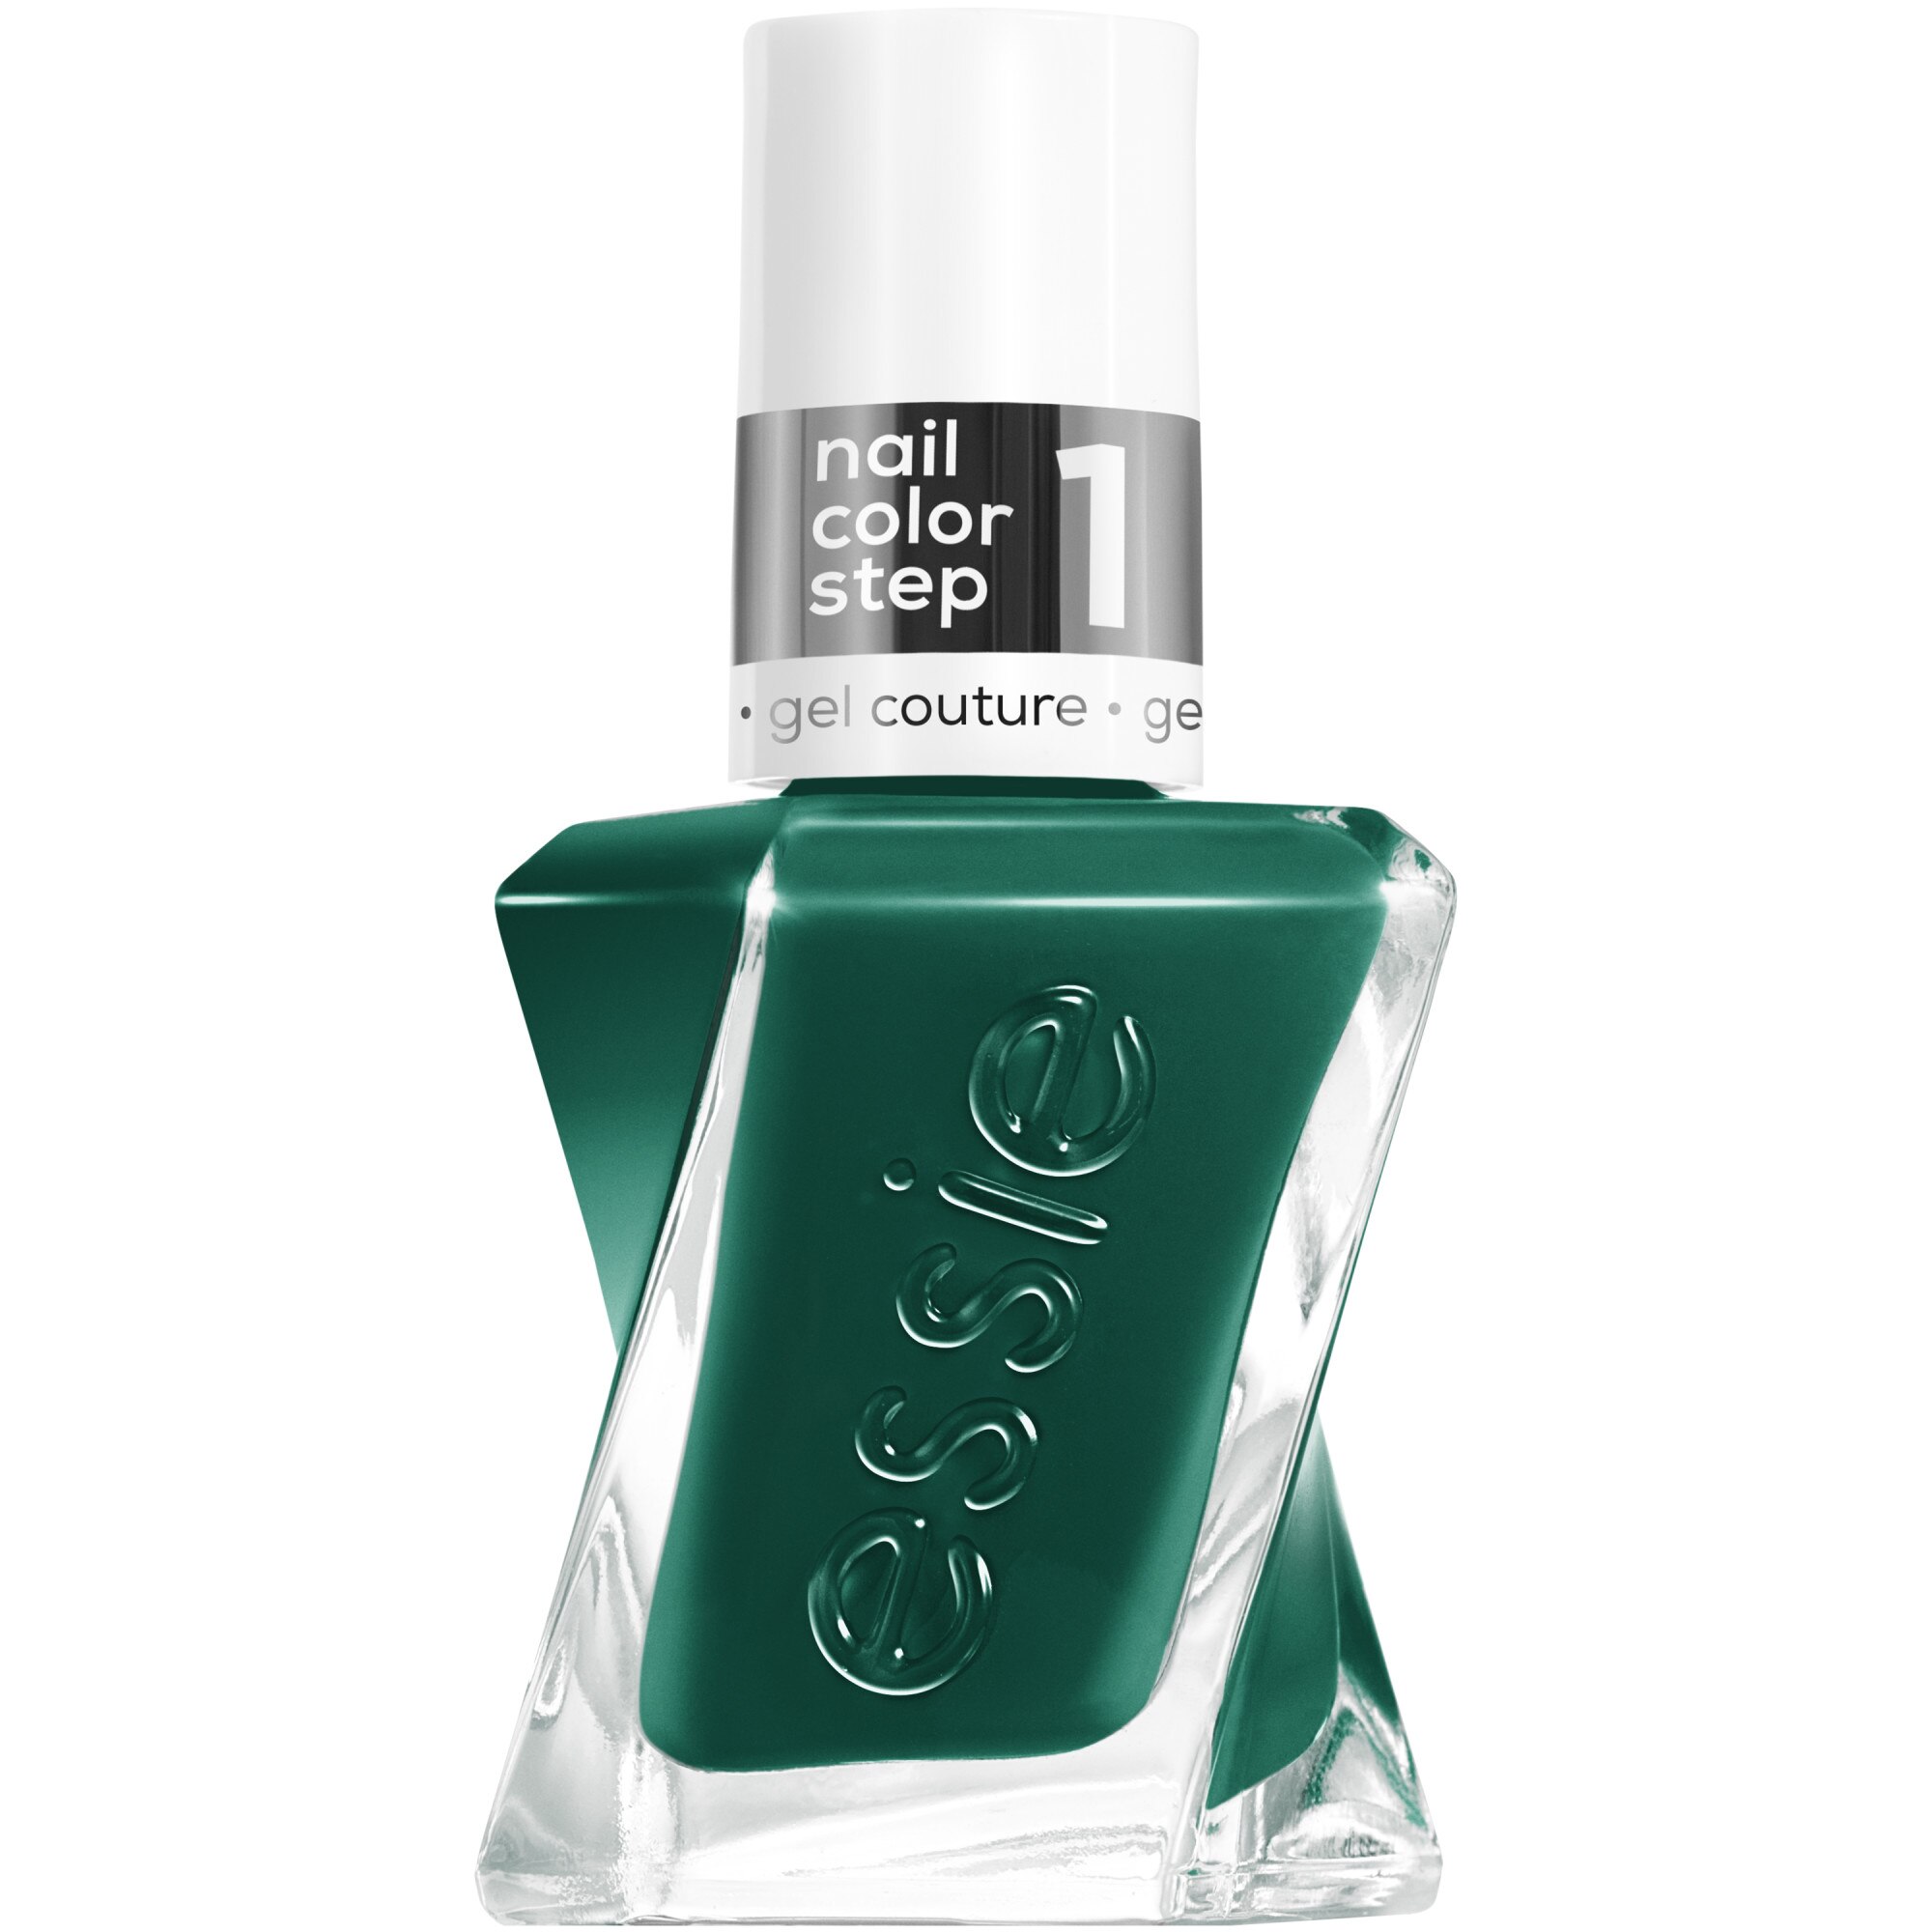 essie Gel Couture Longwear Nail Polish, Daisy Jones & The Six Collection